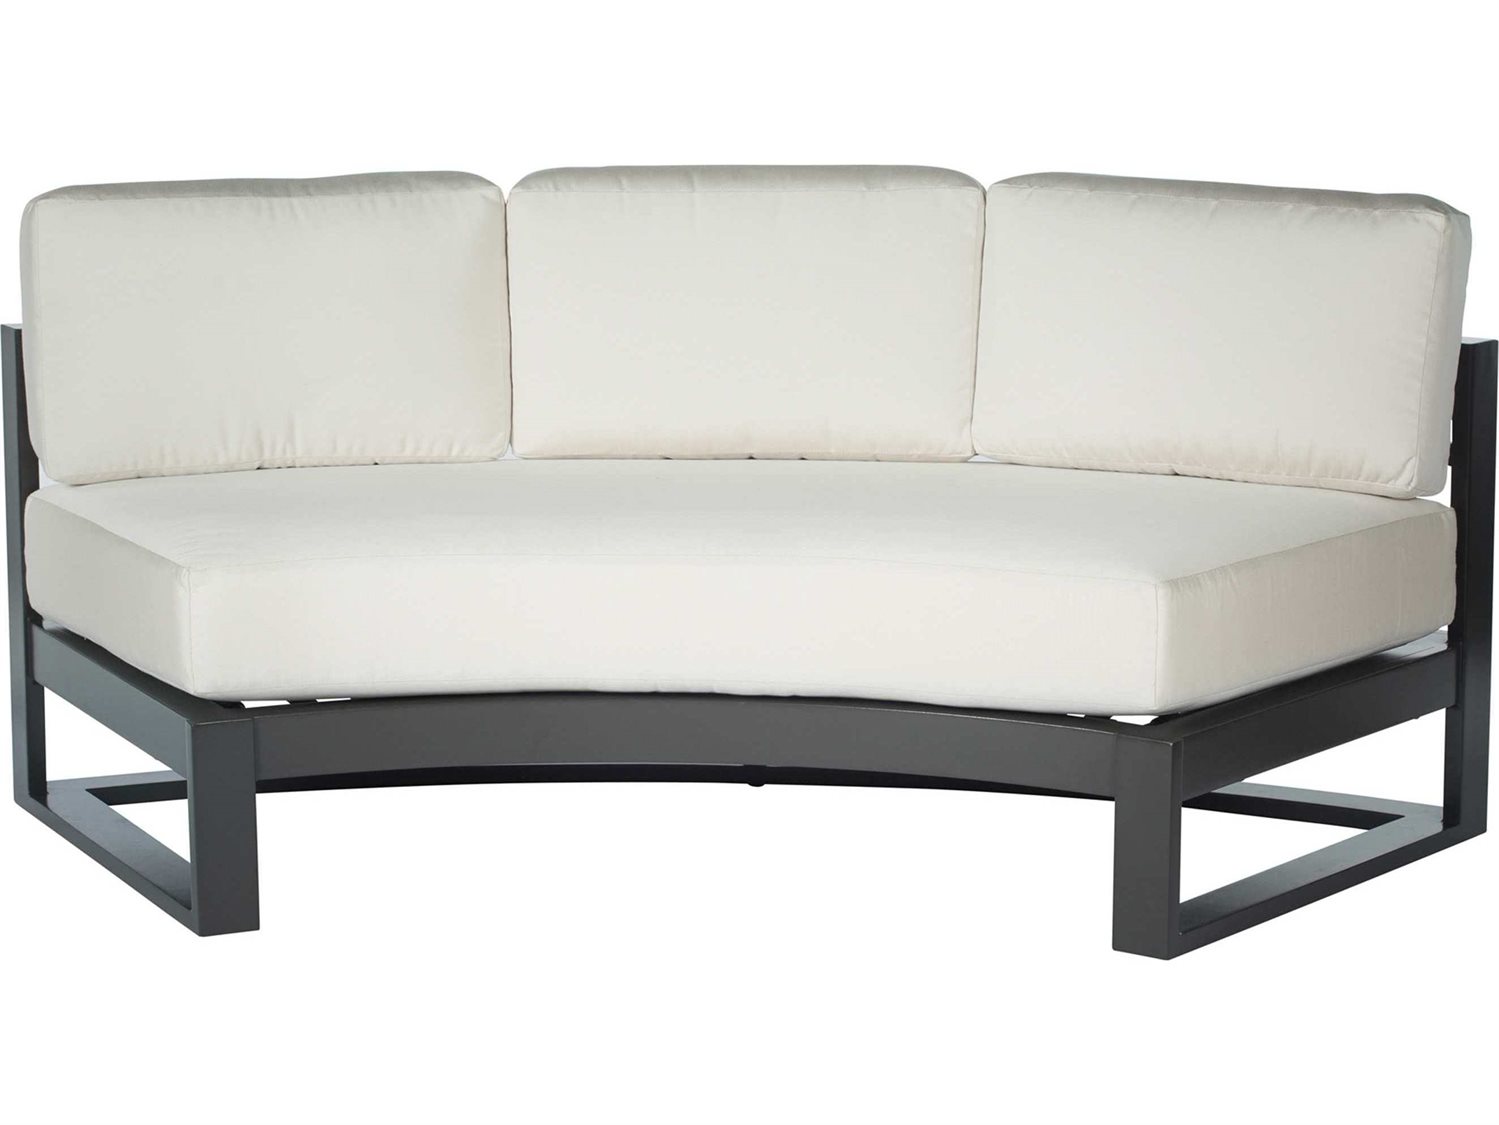 Ebel Palermo Curved Sofa Replacement, Rounded Outdoor Sofa Cushions